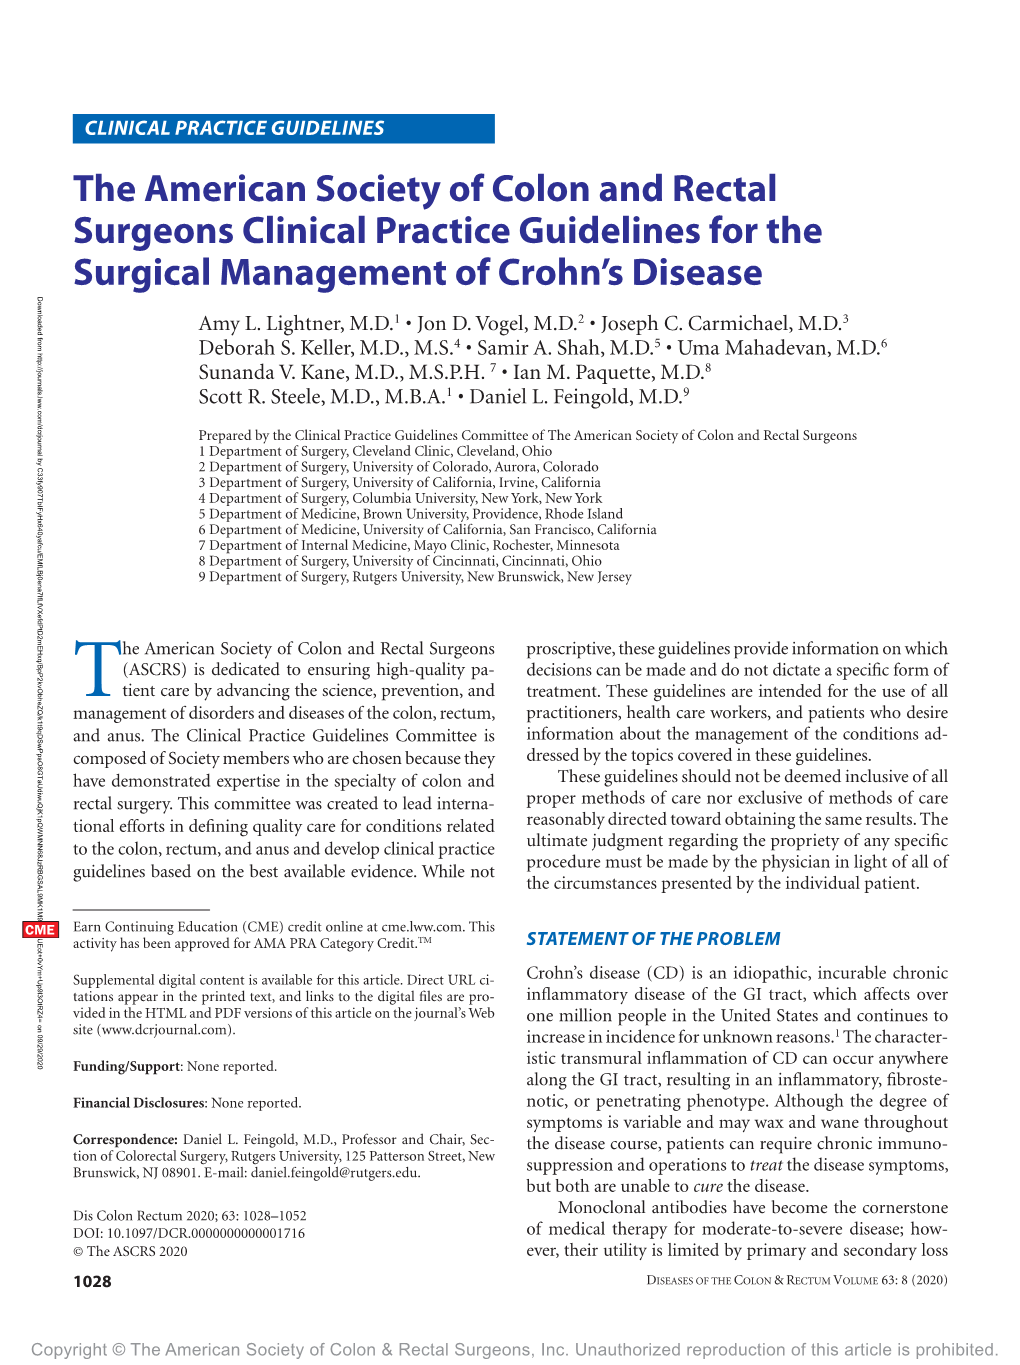 Clinical Practice Guideline for the Surgical Management of Crohn's